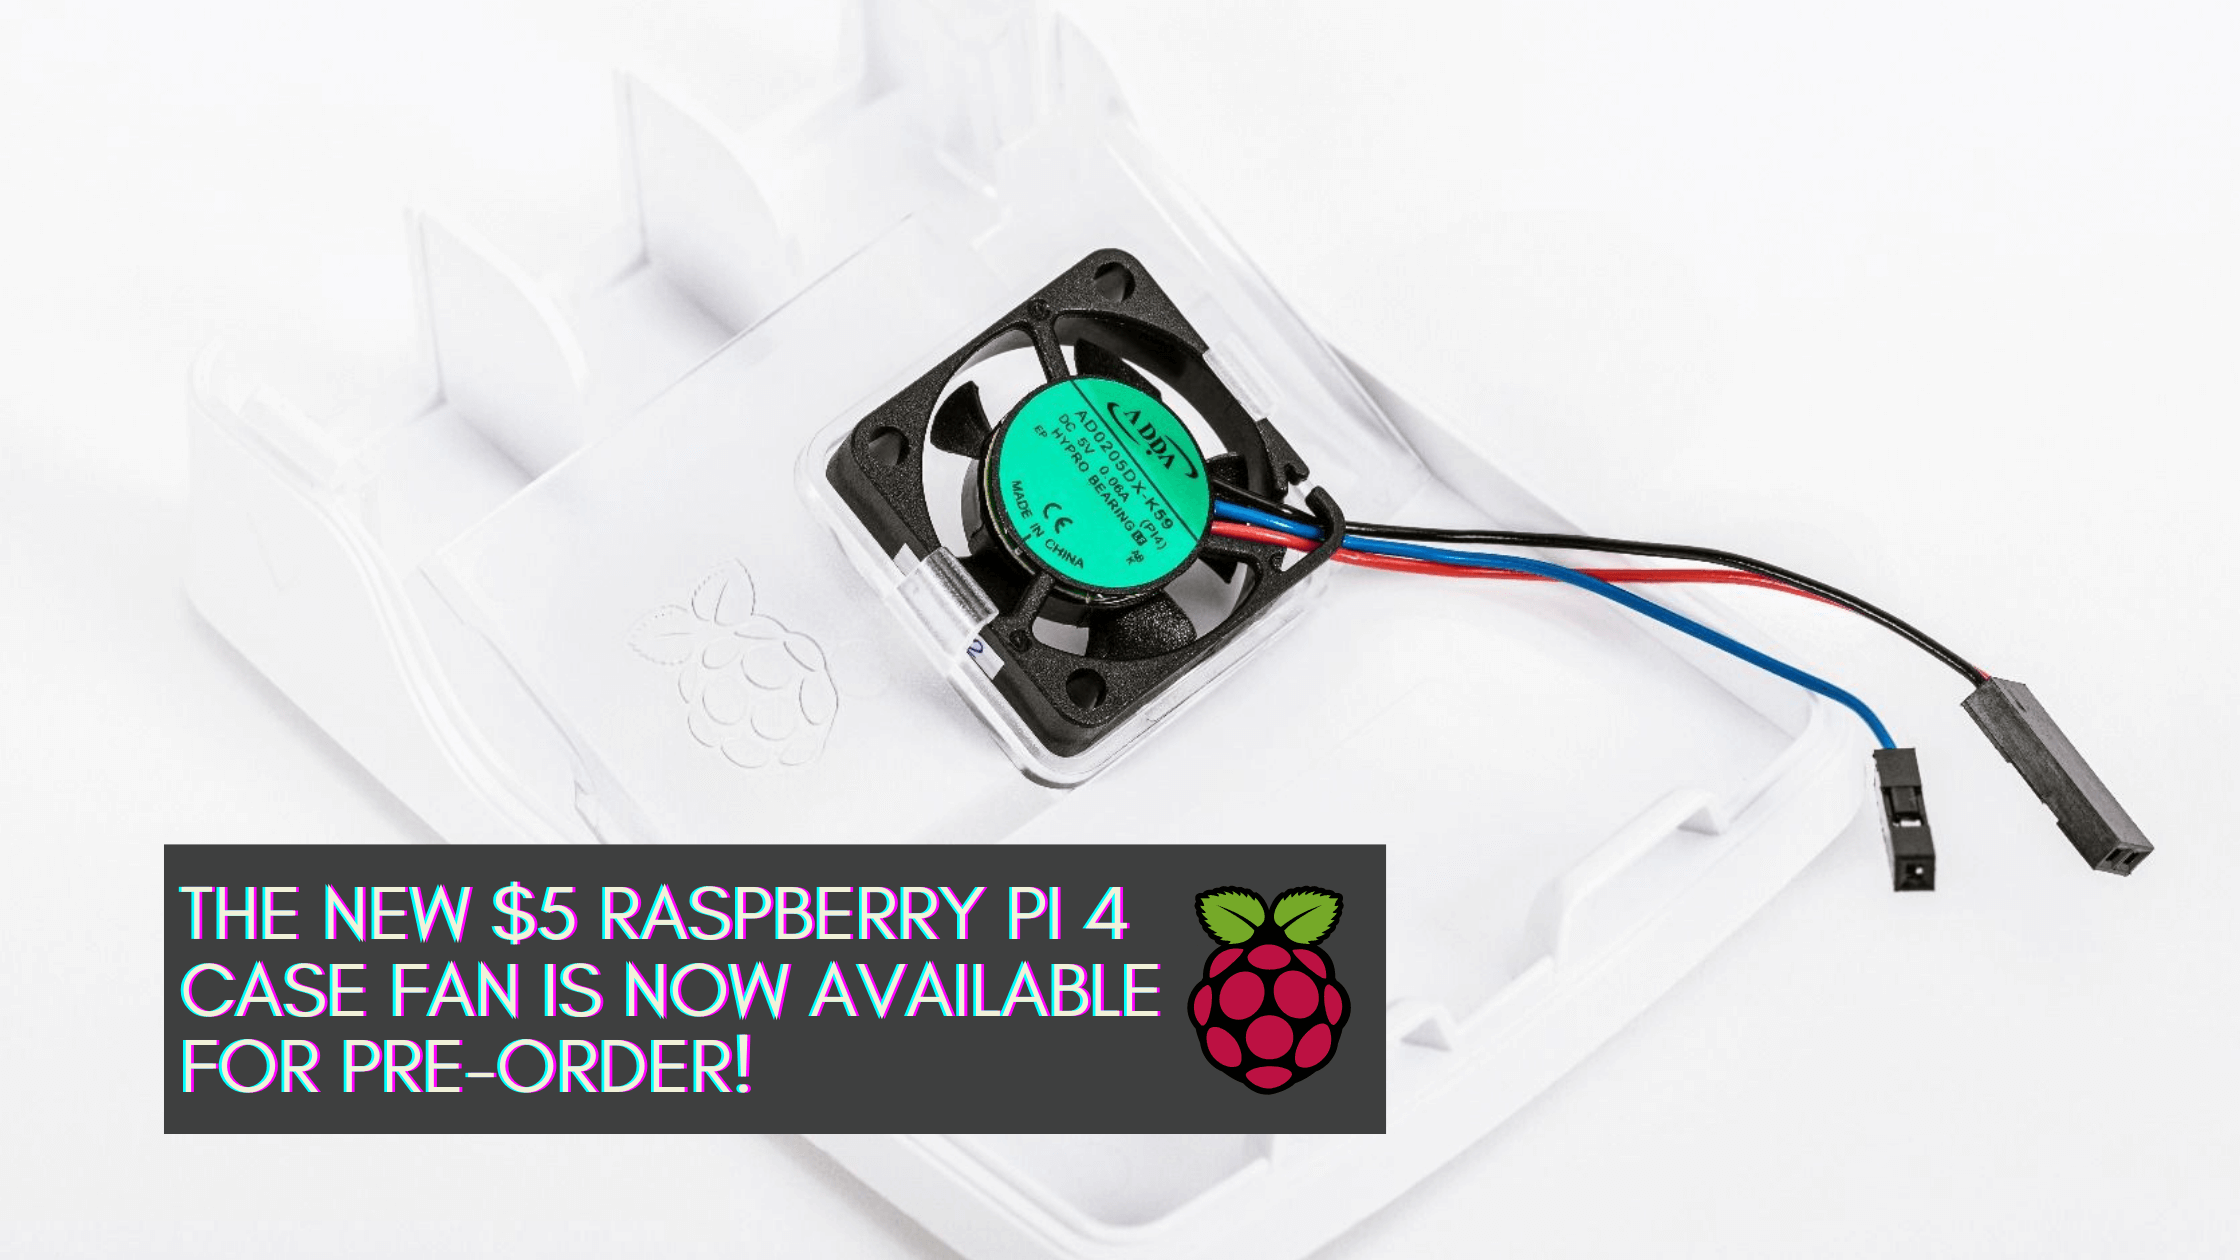 The new $5 Raspberry Pi 4 Case fan is now available for pre-order